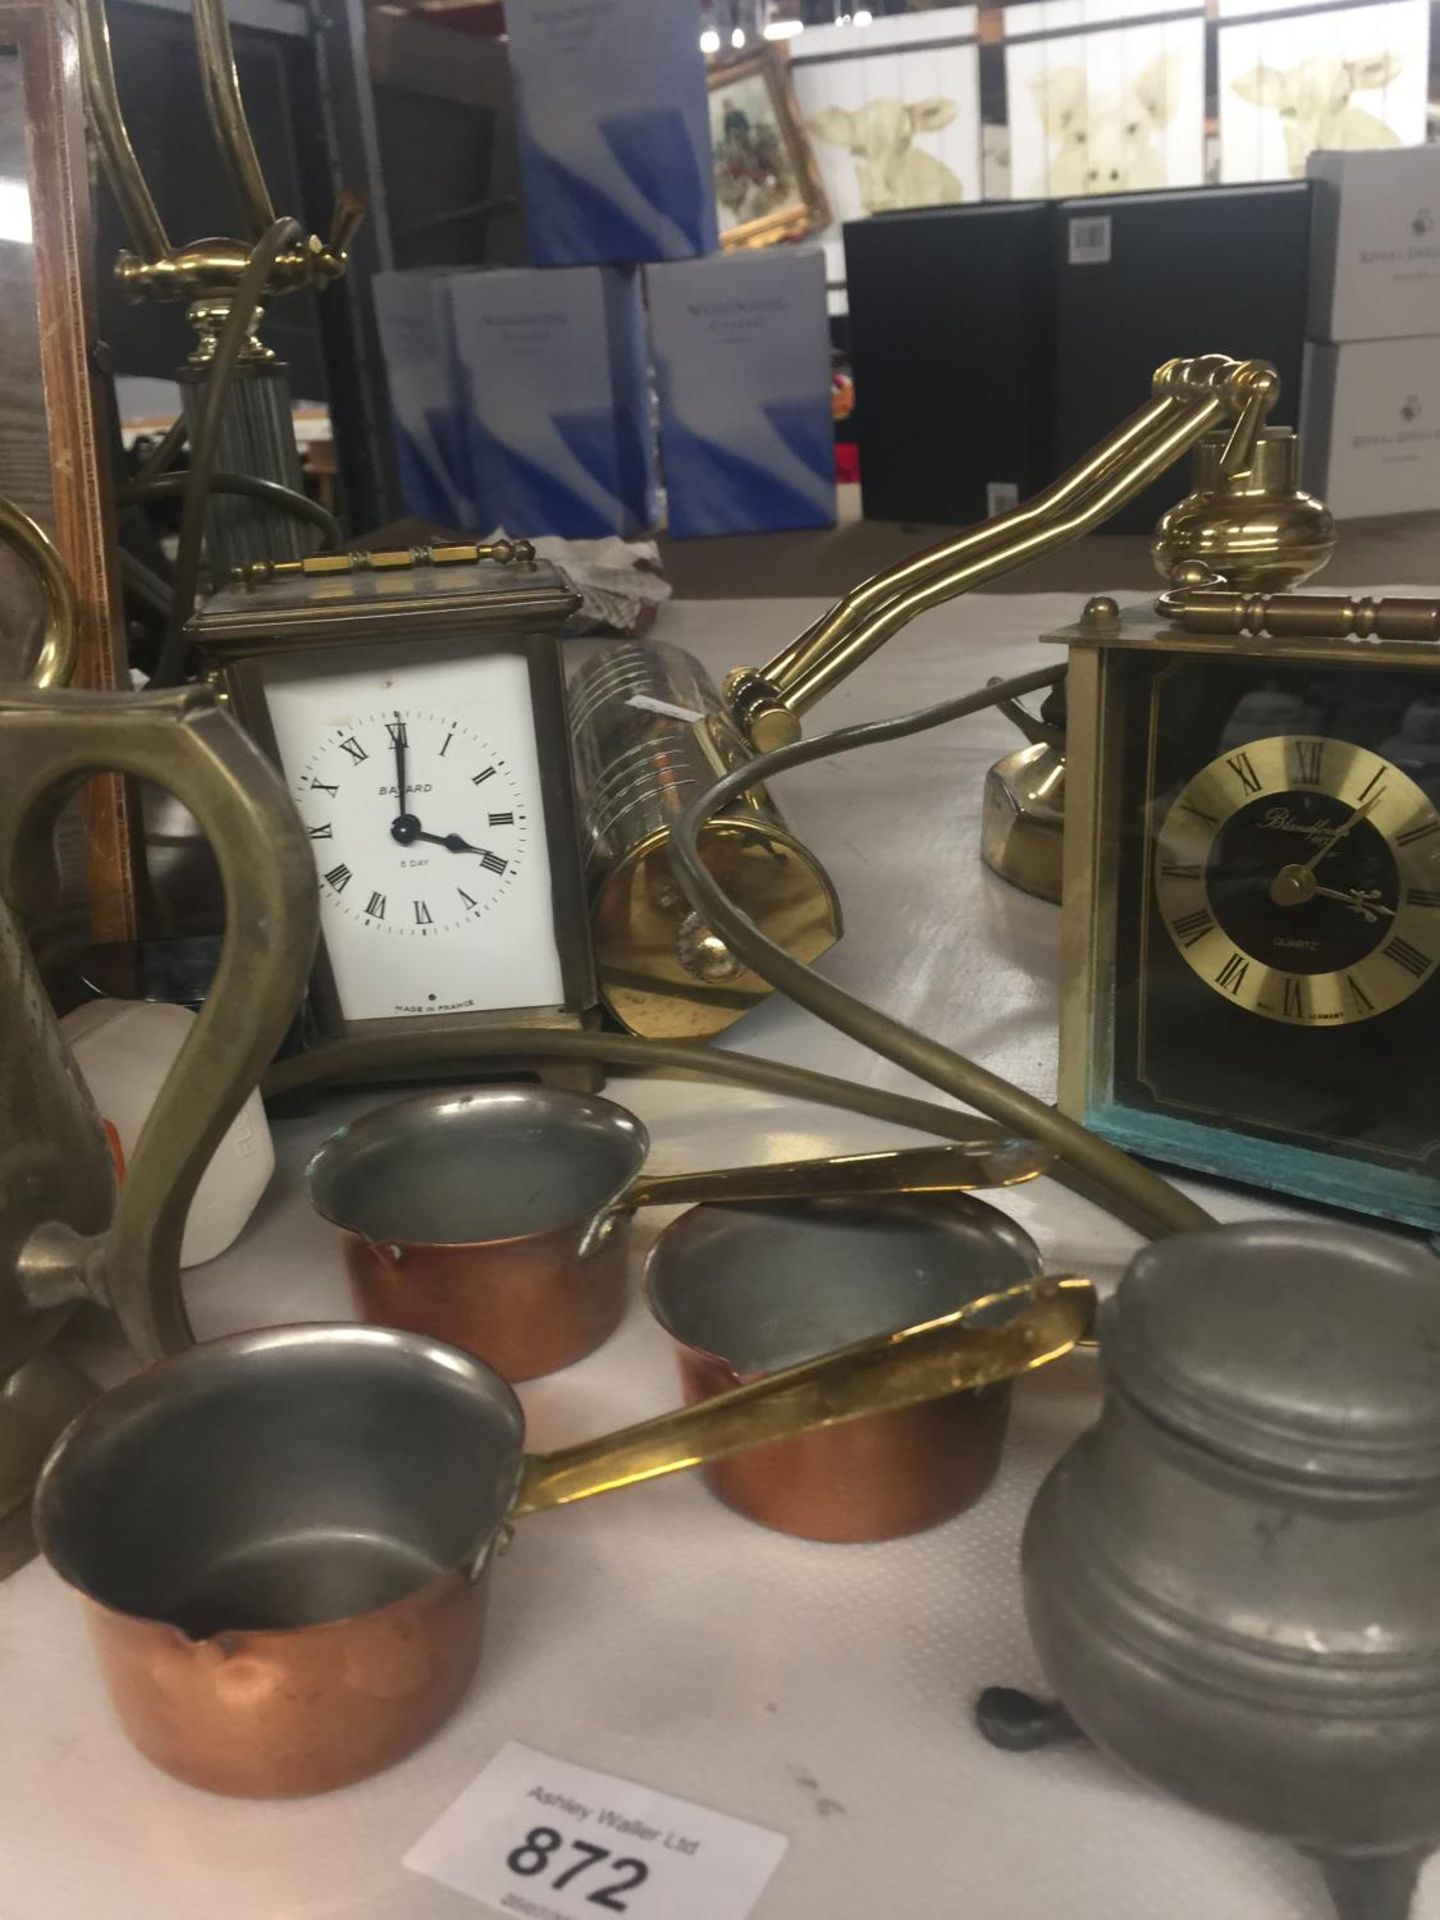 TWO BANKERS STYLE LAMPS, TWO CARRIAGE CLOCKS, COPPER JUG AND SMALL PANS, BRASS TANKARD, ETC - Image 2 of 6